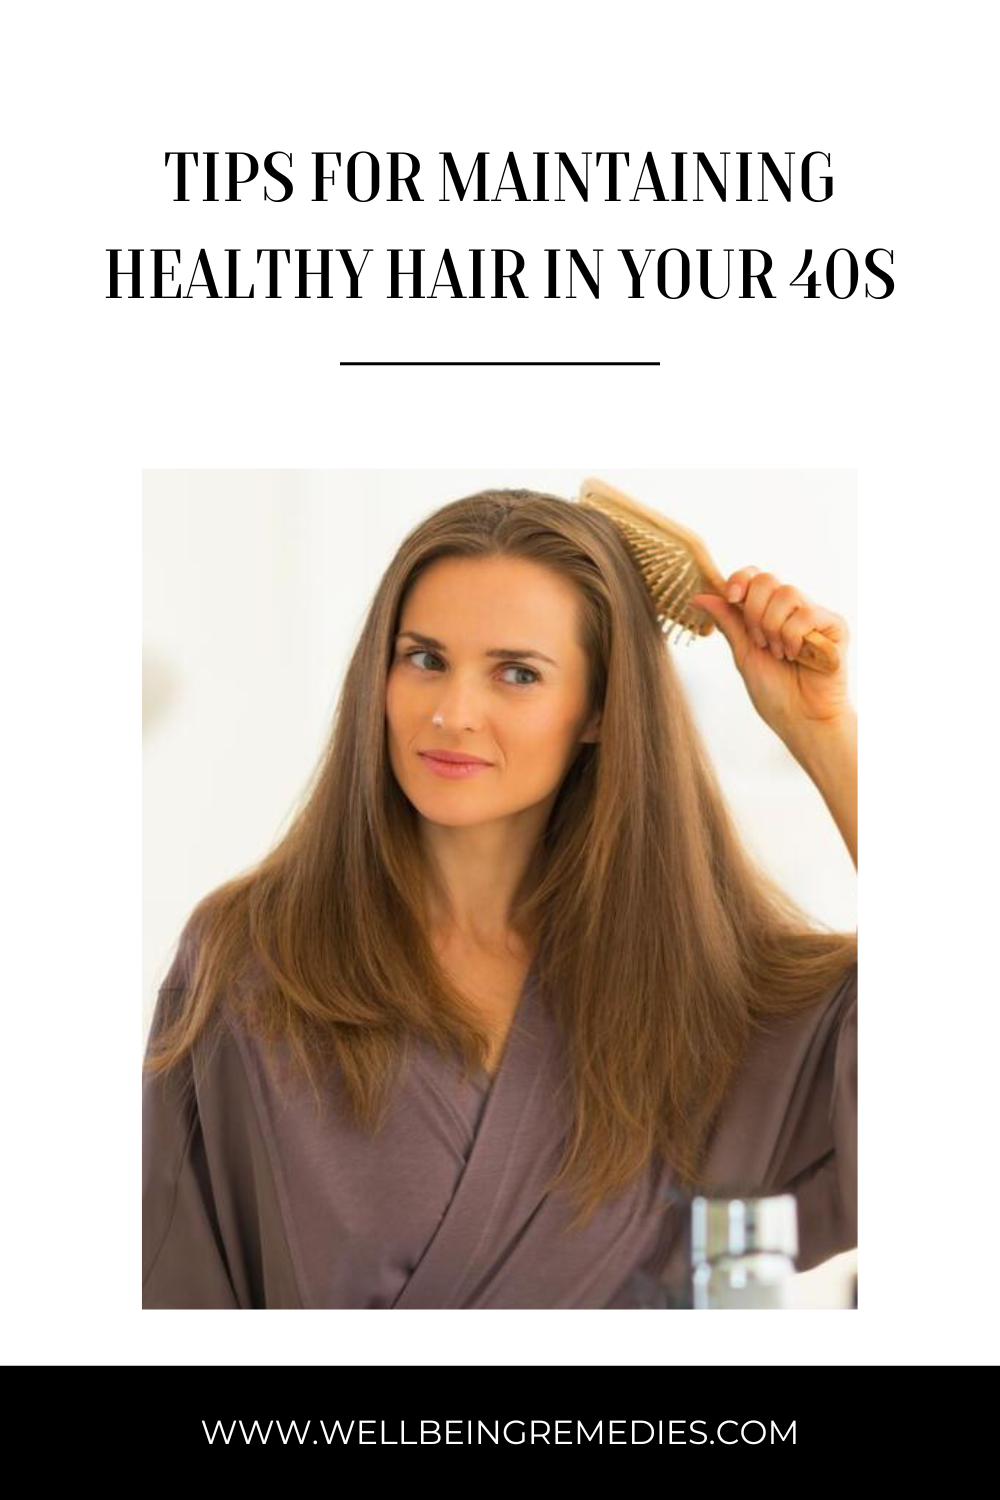 Tips for Maintaining Healthy Hair in Your 40s